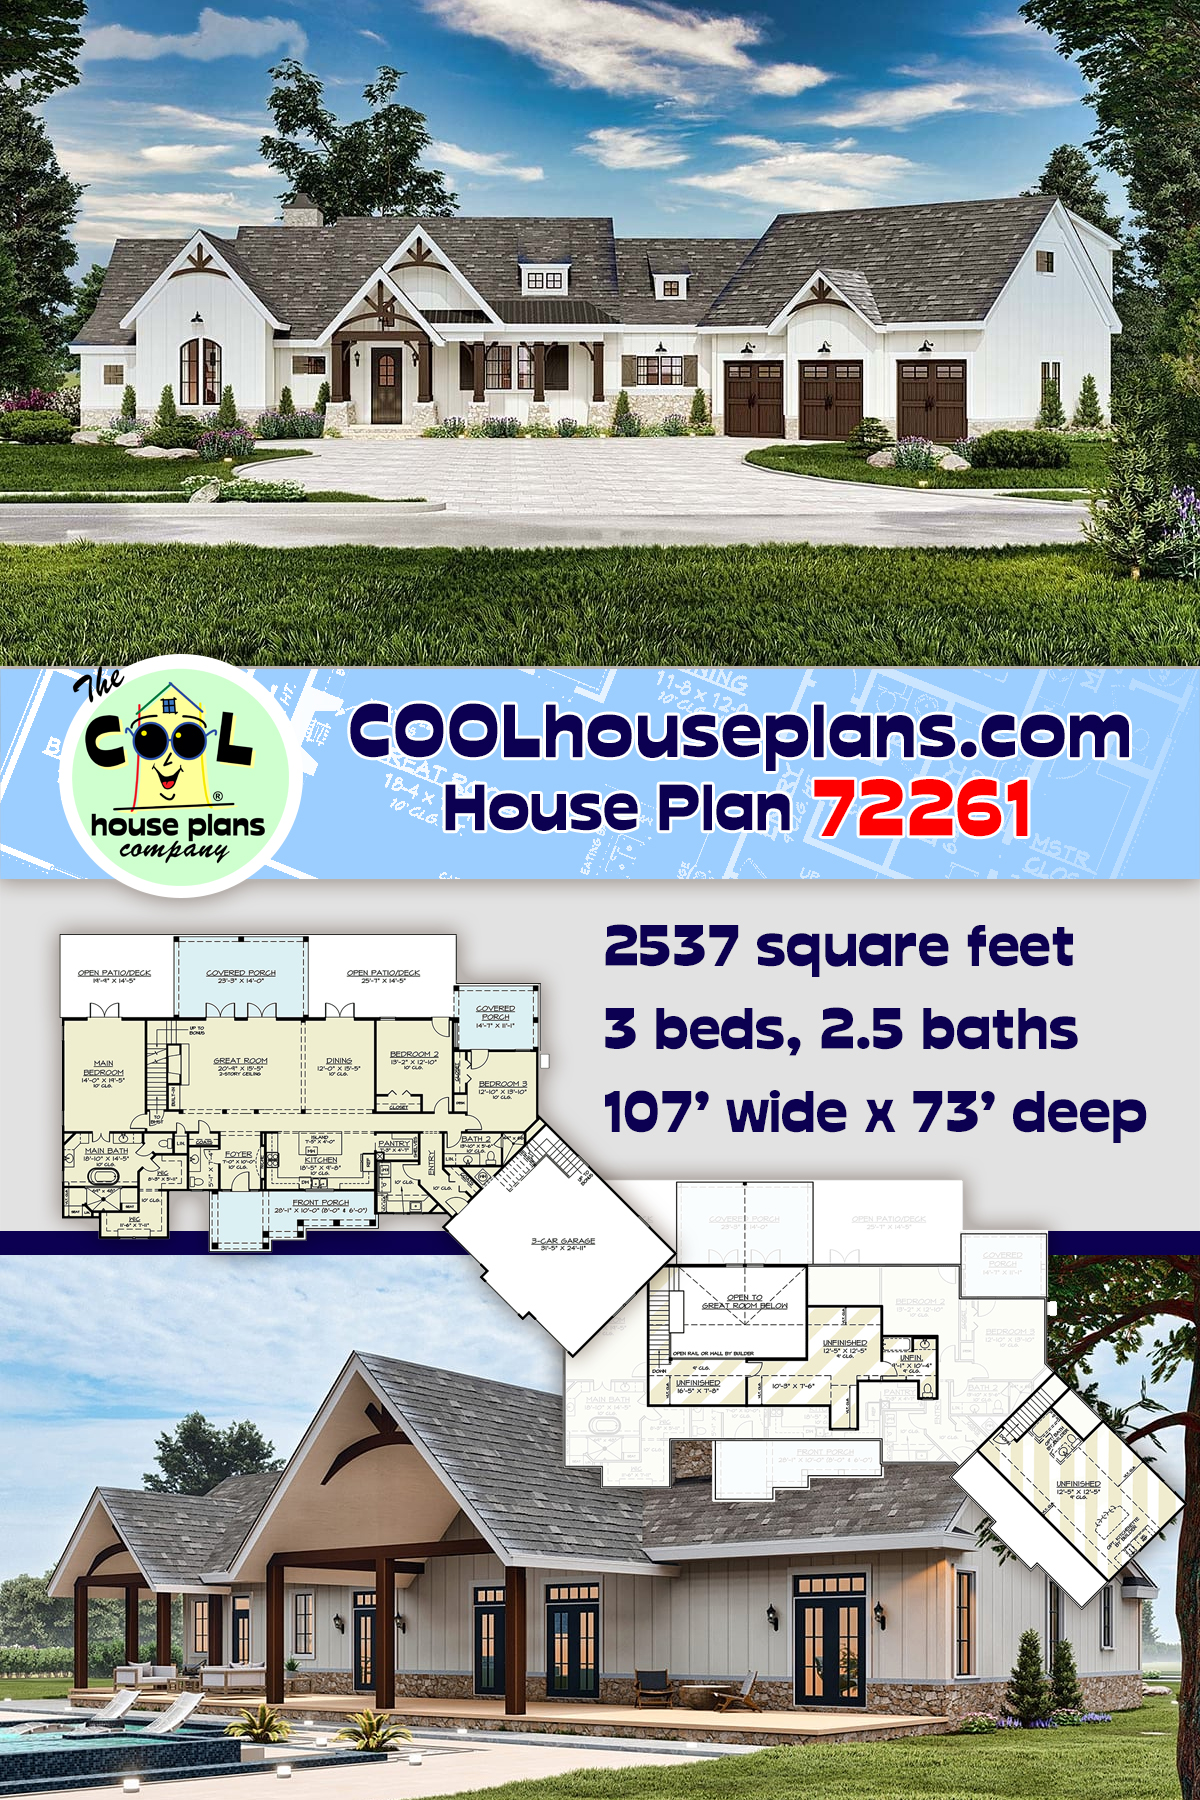 Country, Craftsman, Farmhouse, Traditional House Plan 72261 with 3 Beds, 3 Baths, 3 Car Garage